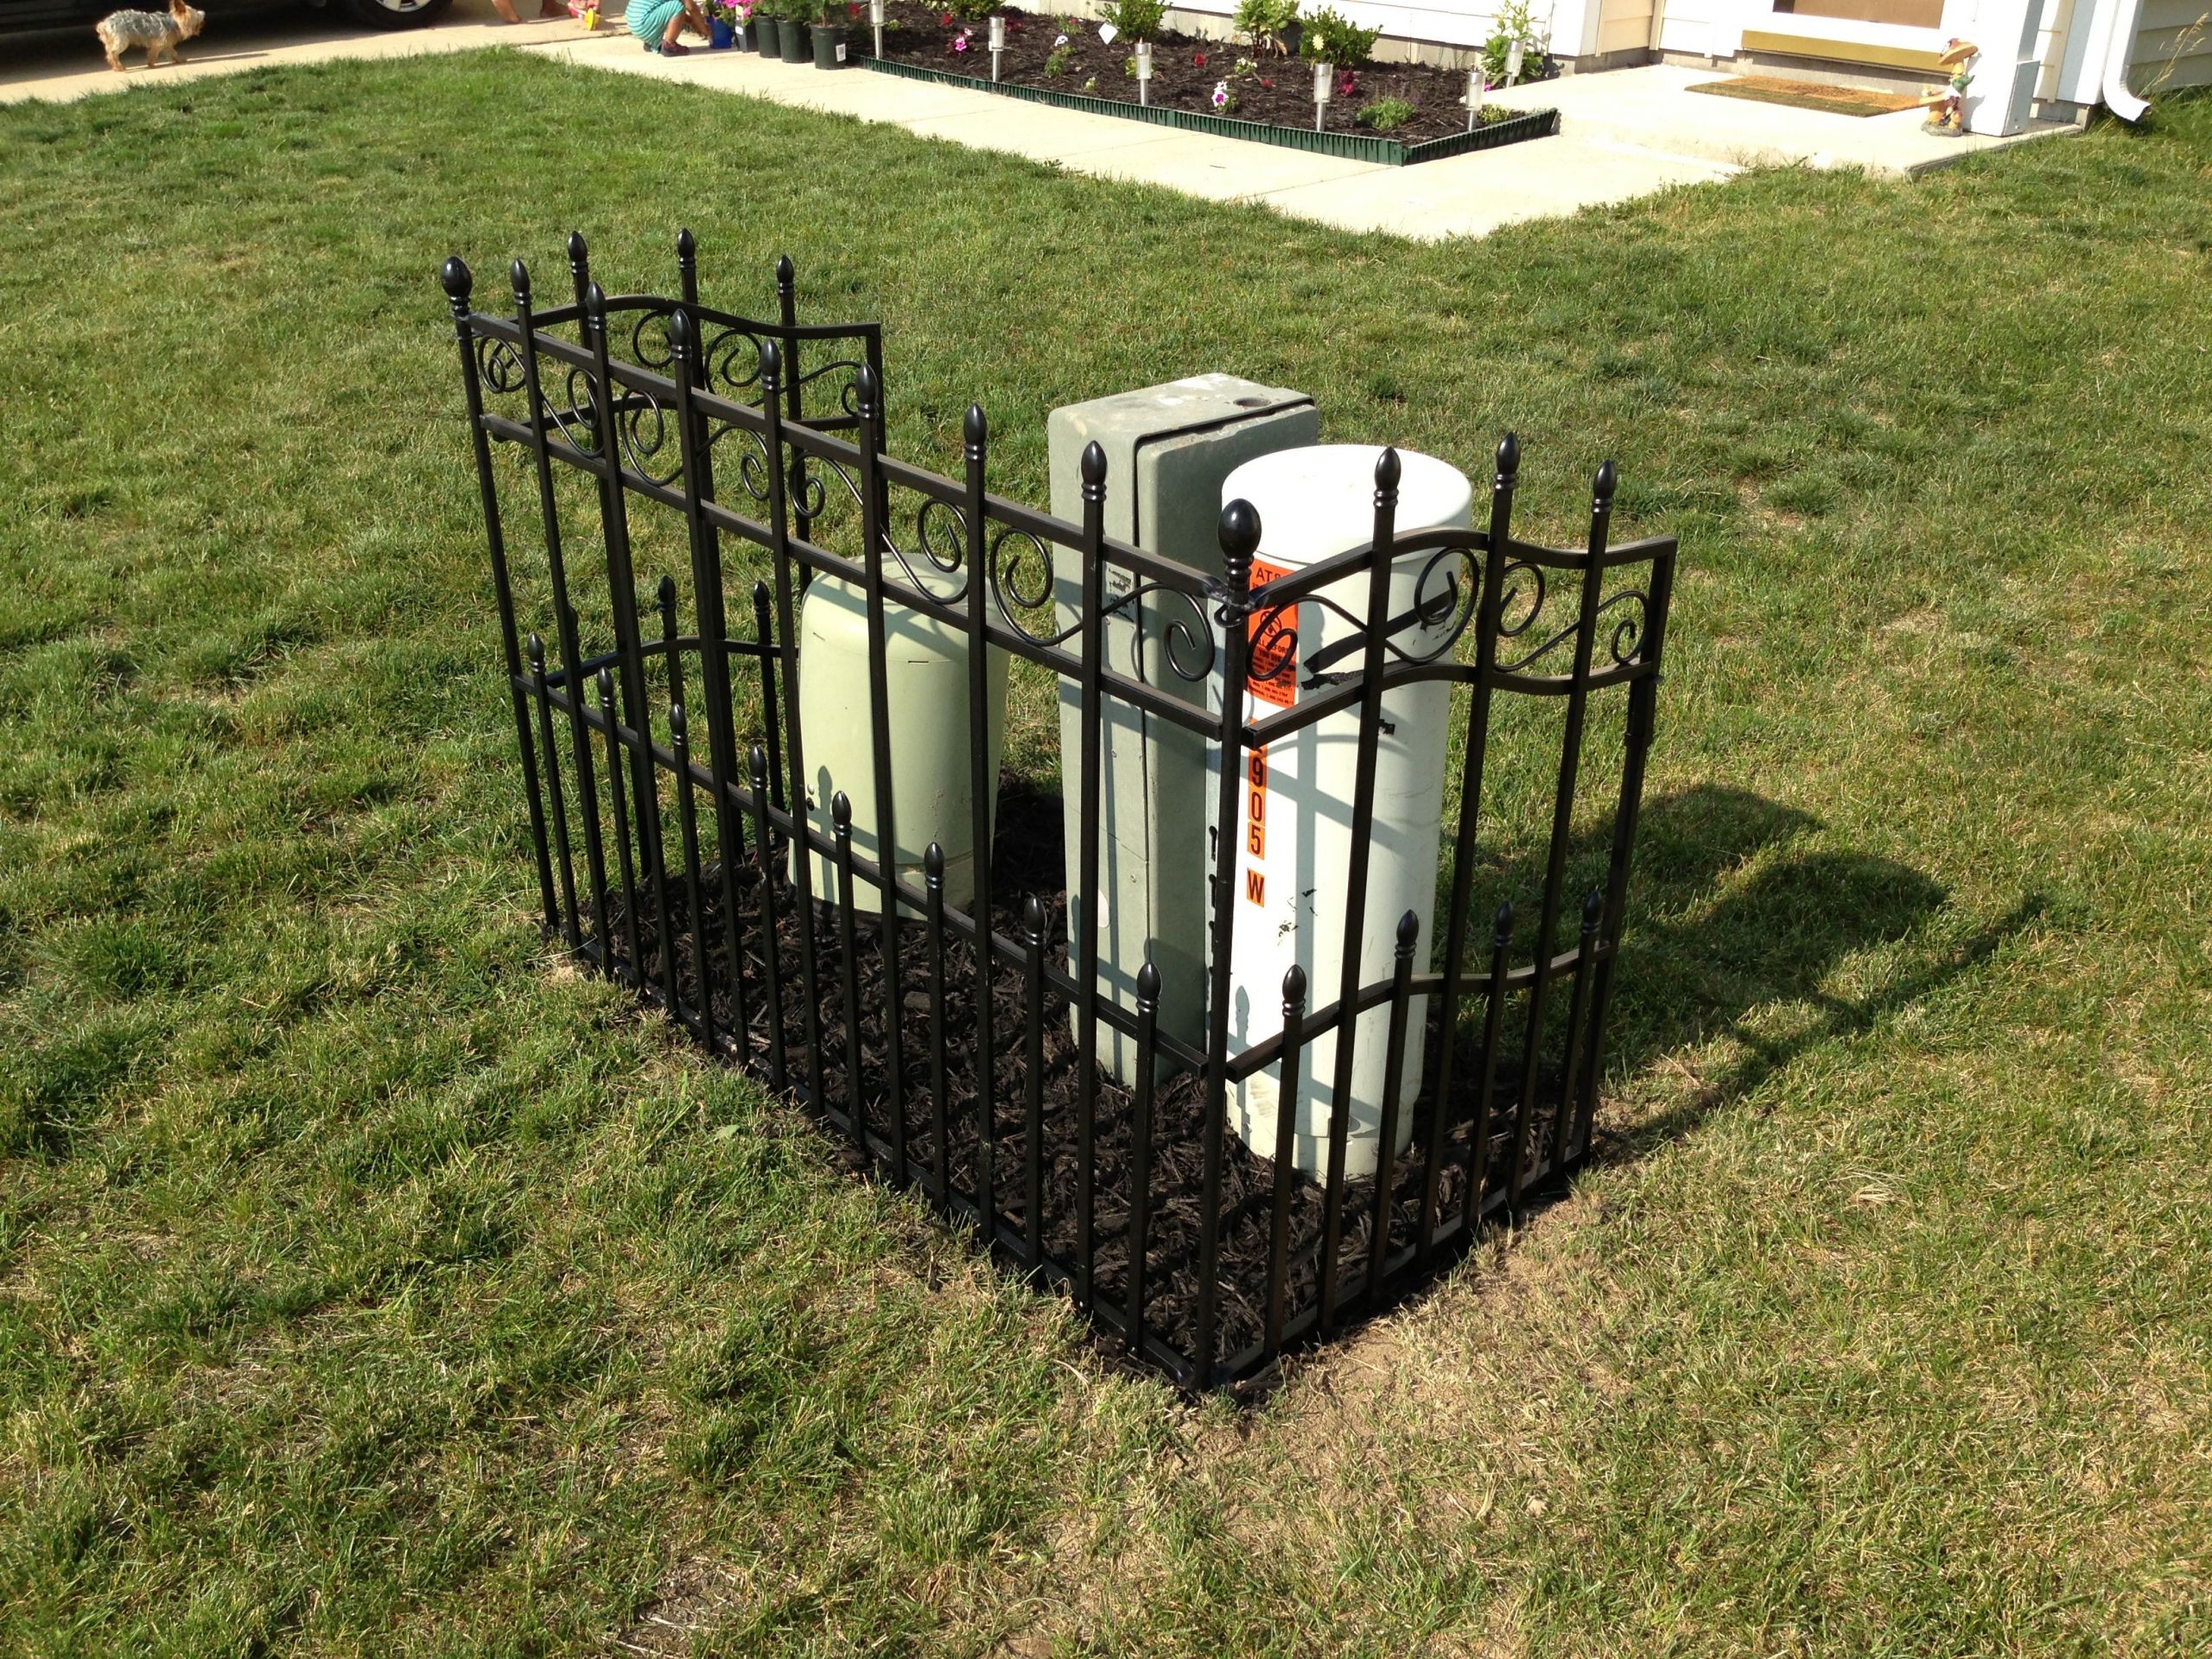 Outdoor Electrical Box Covers Landscaping
 Electric box cover up Lawn & Garden